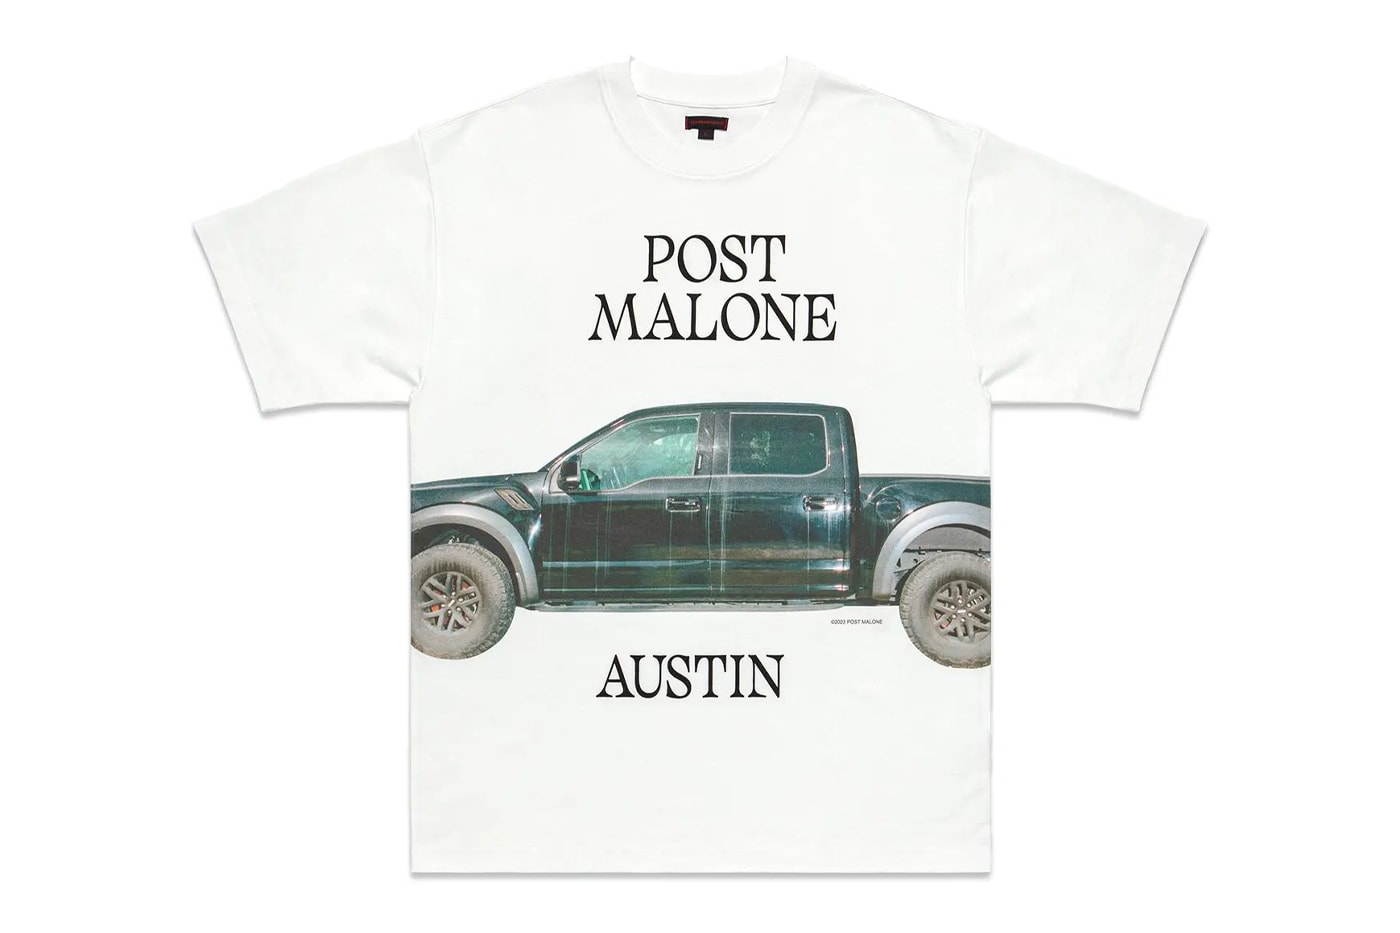 CLOT Post Malone AUSTIN Tee Hong Kong Release Info Date Buy Price If Y'all Weren't Here, I'd Be Crying World Tour